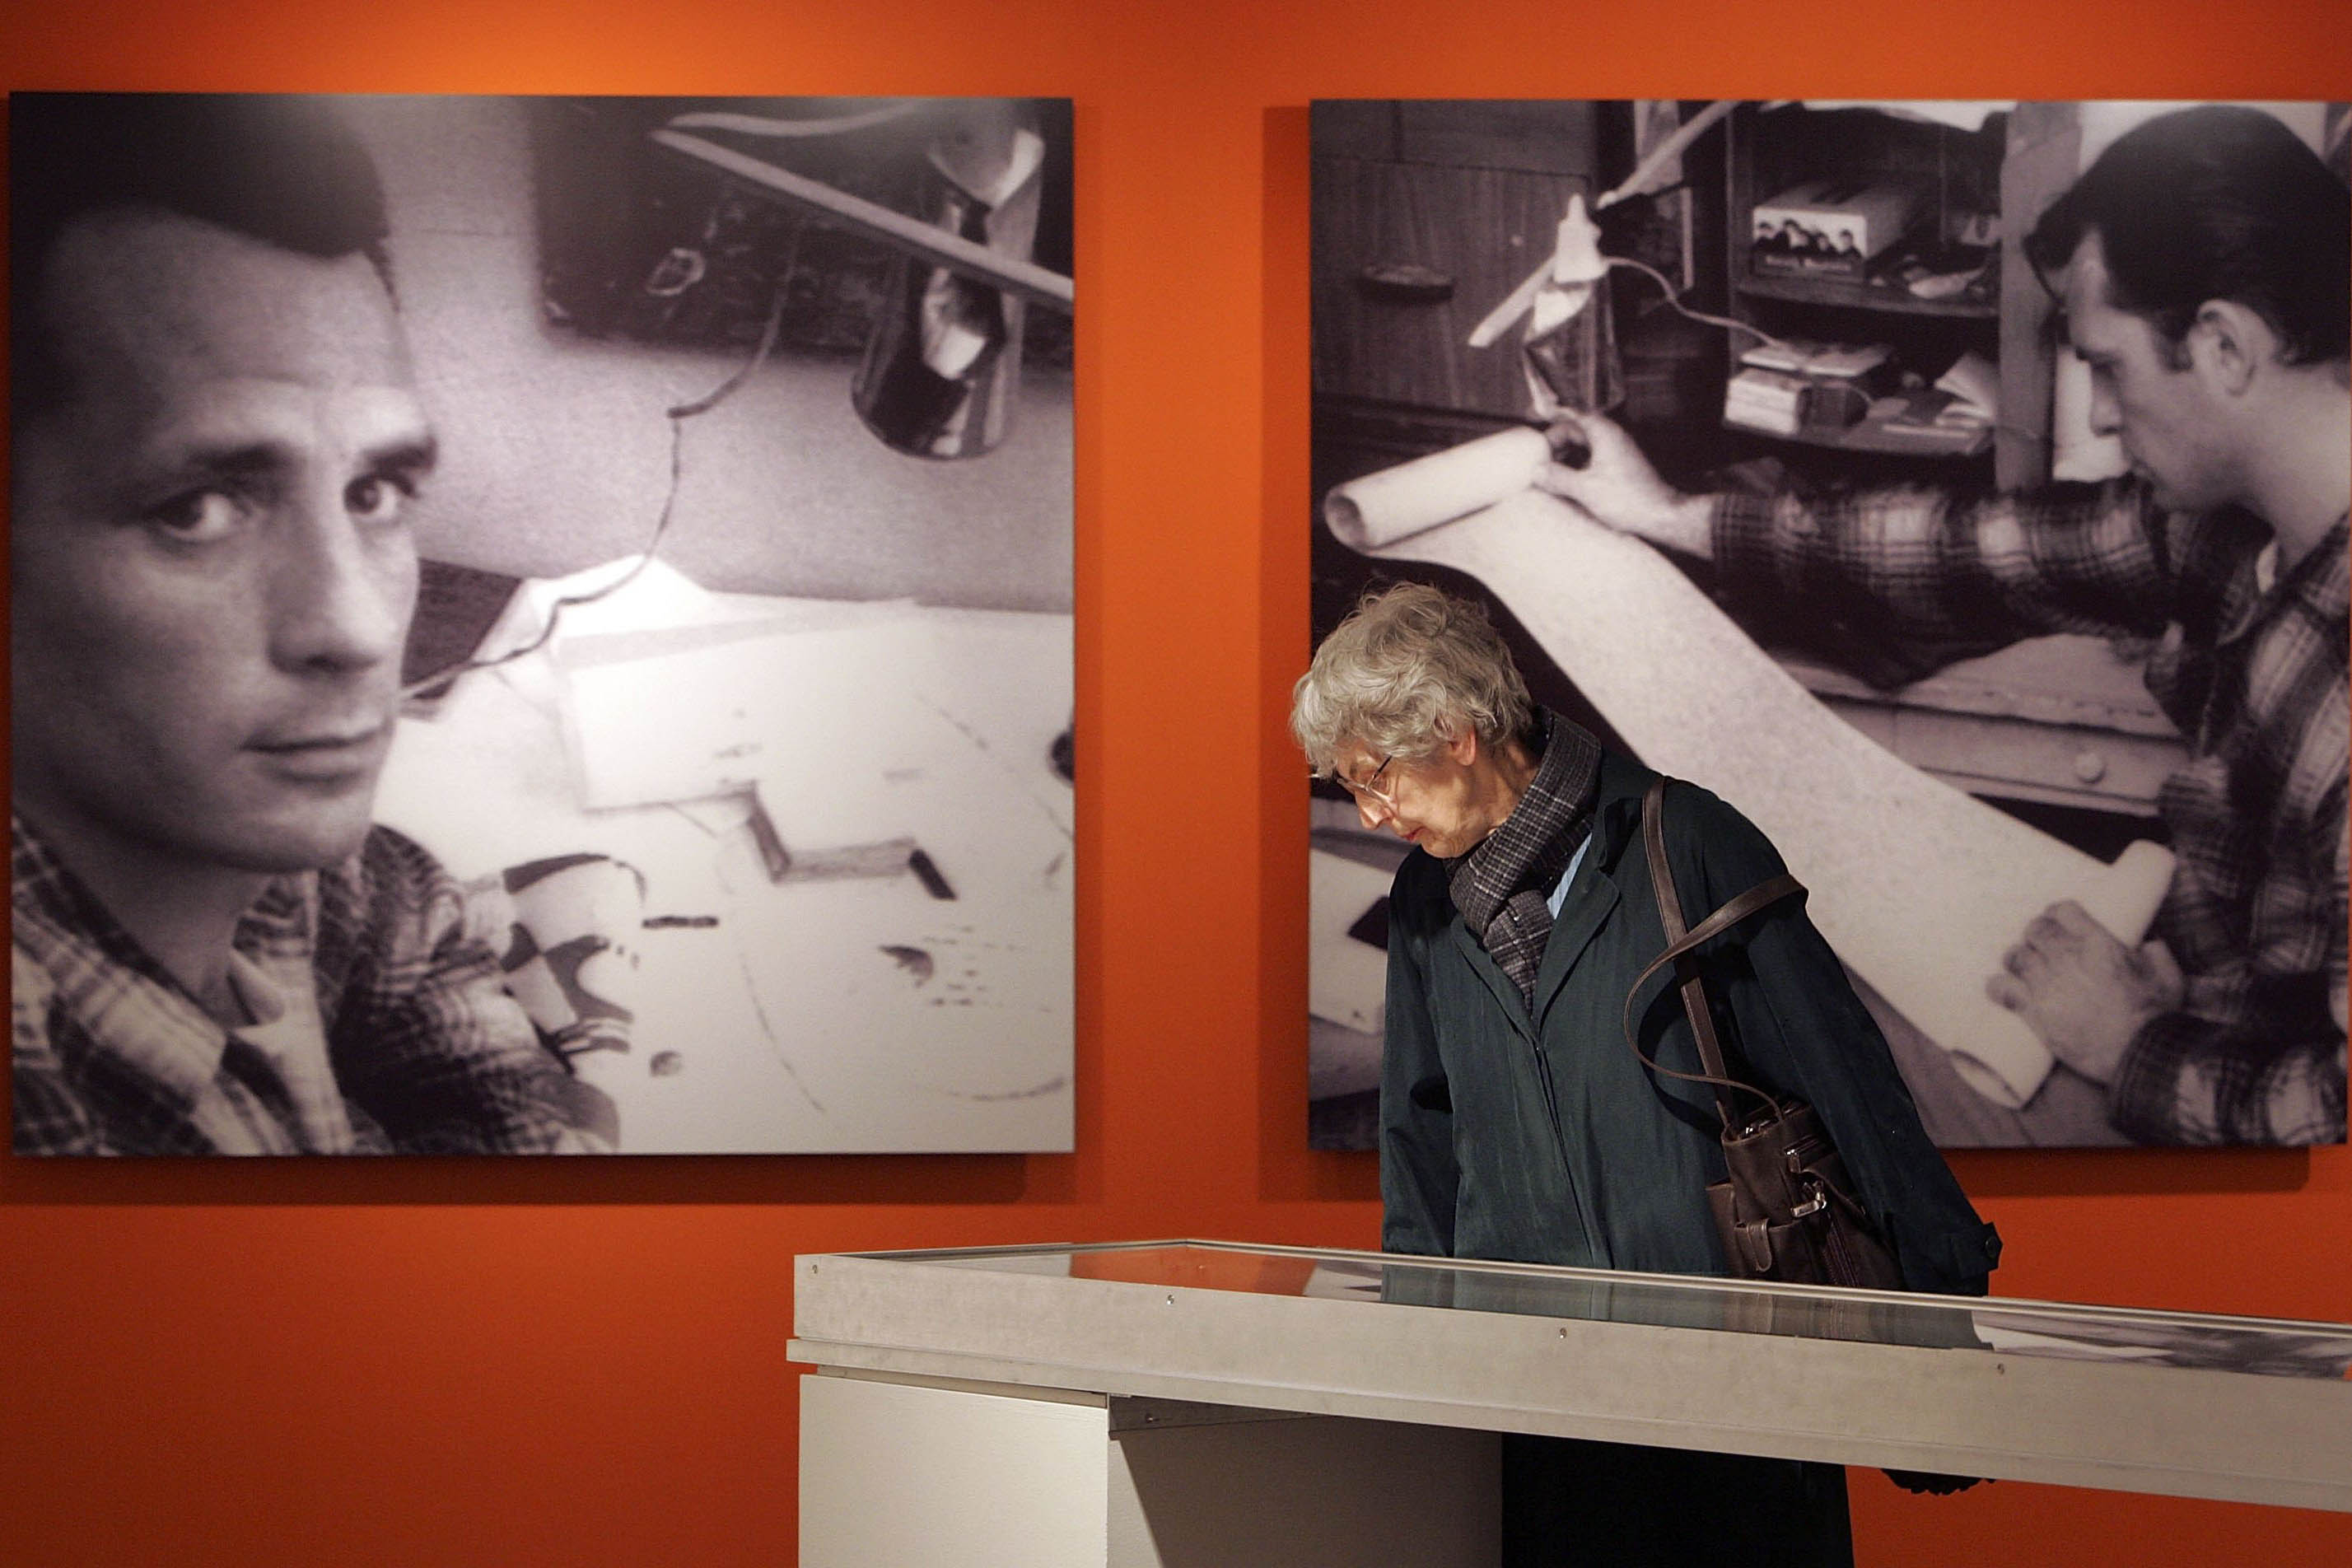 A photograph of an exhibit of Kerouac's work; there are photographs of him on the background, as a visitor looks at an exhibit.